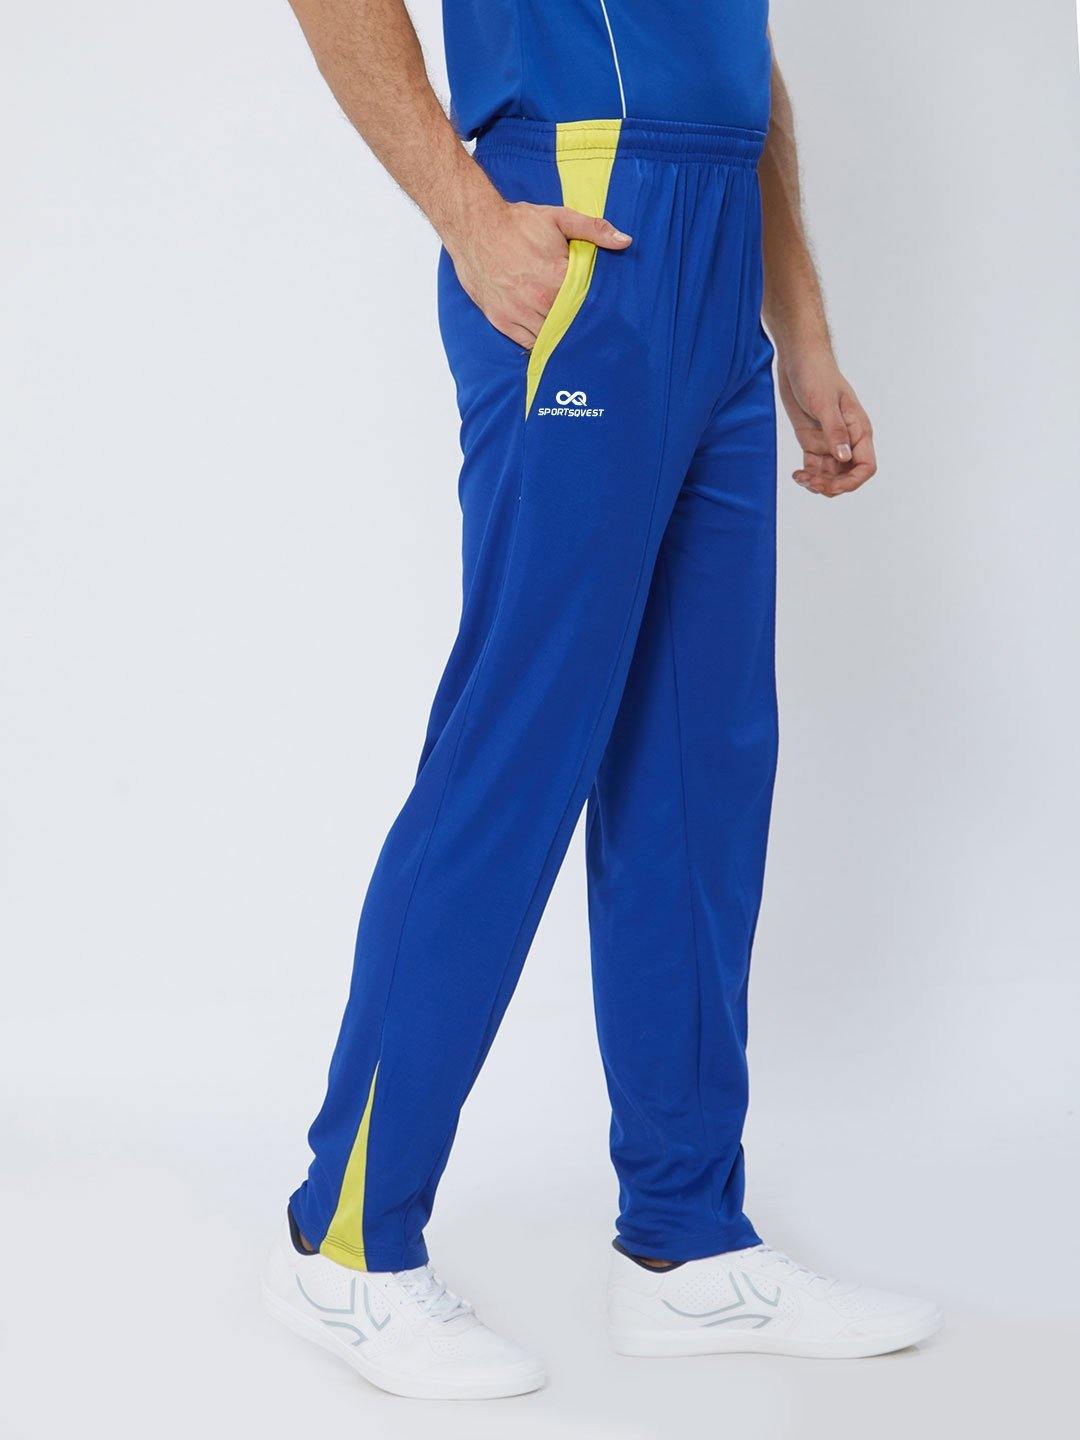 england cricket trousers - Sportswear Apparels Manufacturer Company